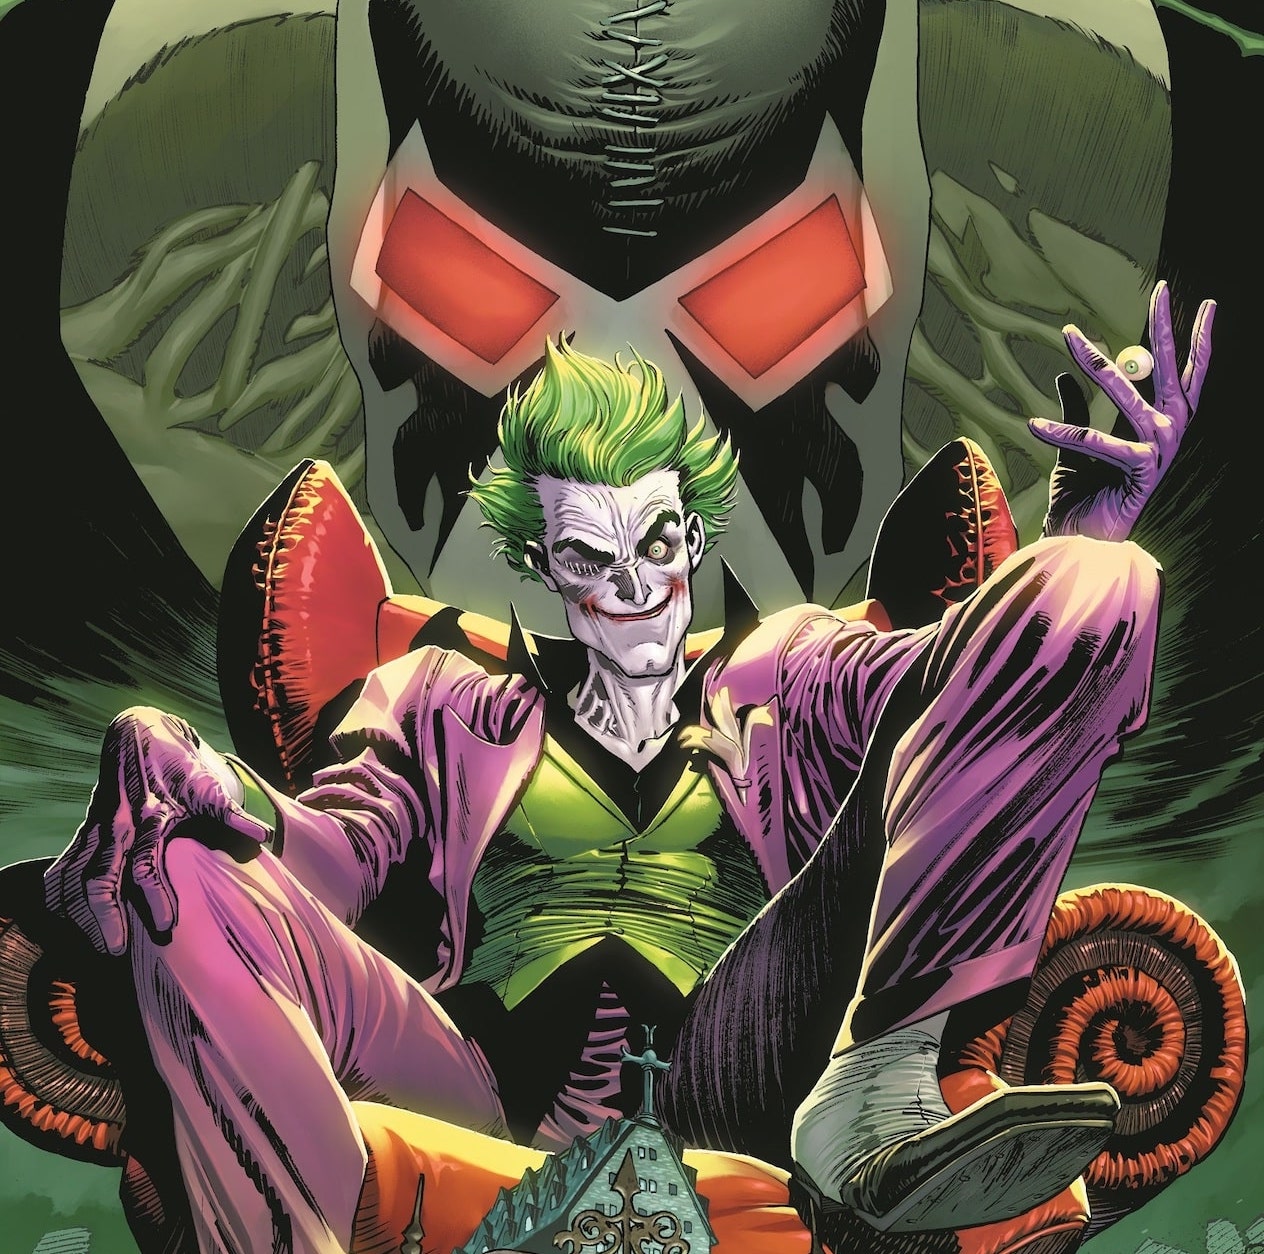 DC Comics launching 'The Joker' #1 a new ongoing series March 2021